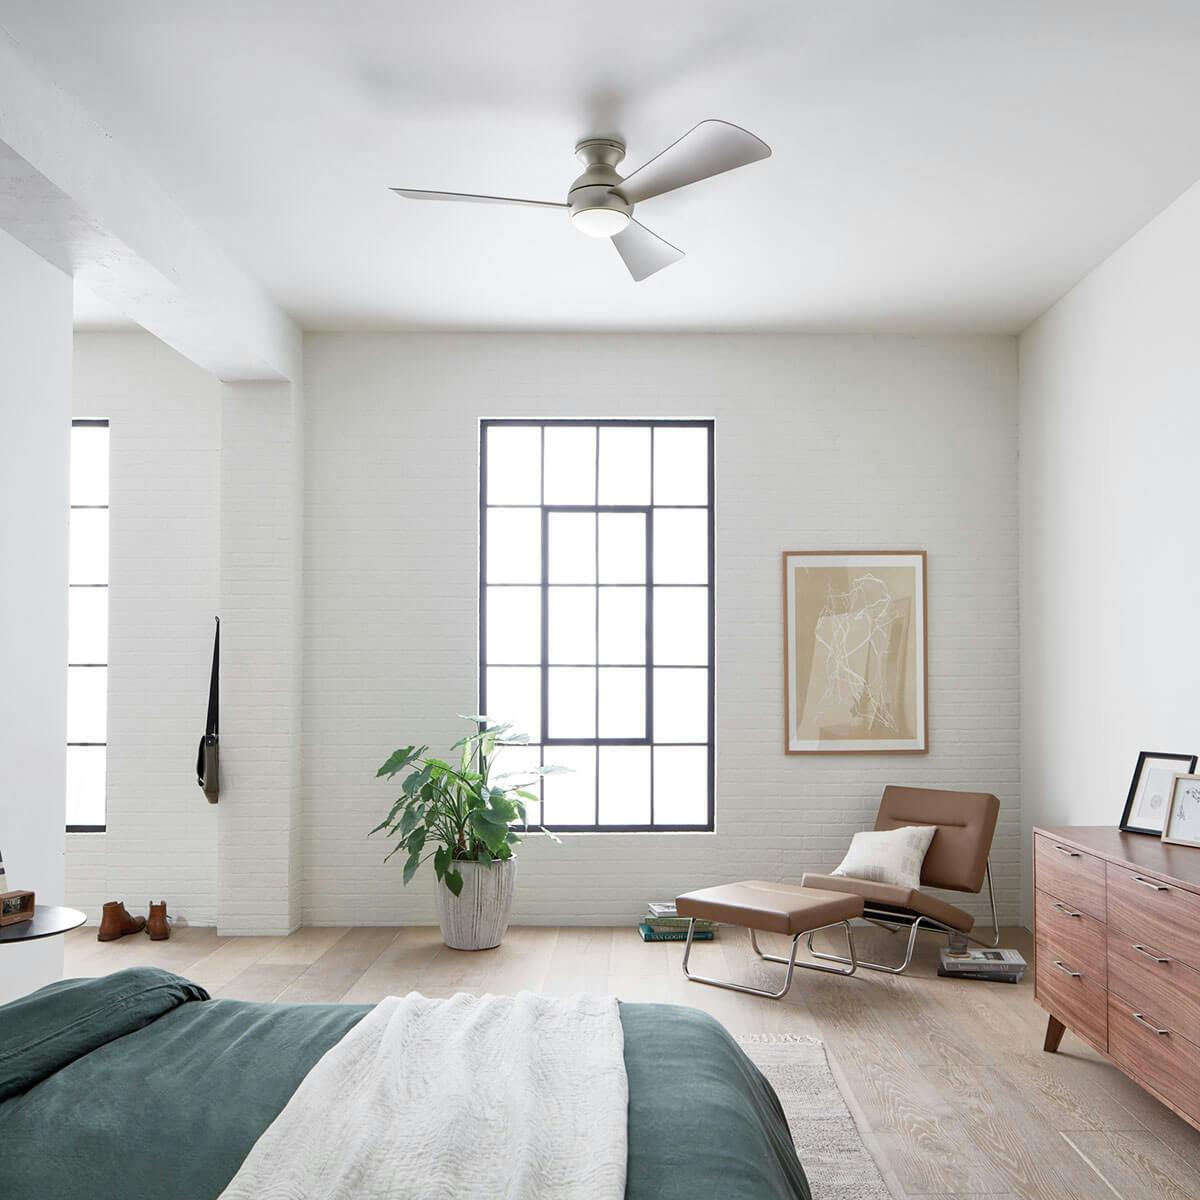 Day timebedroom image featuring Sola 330152NI